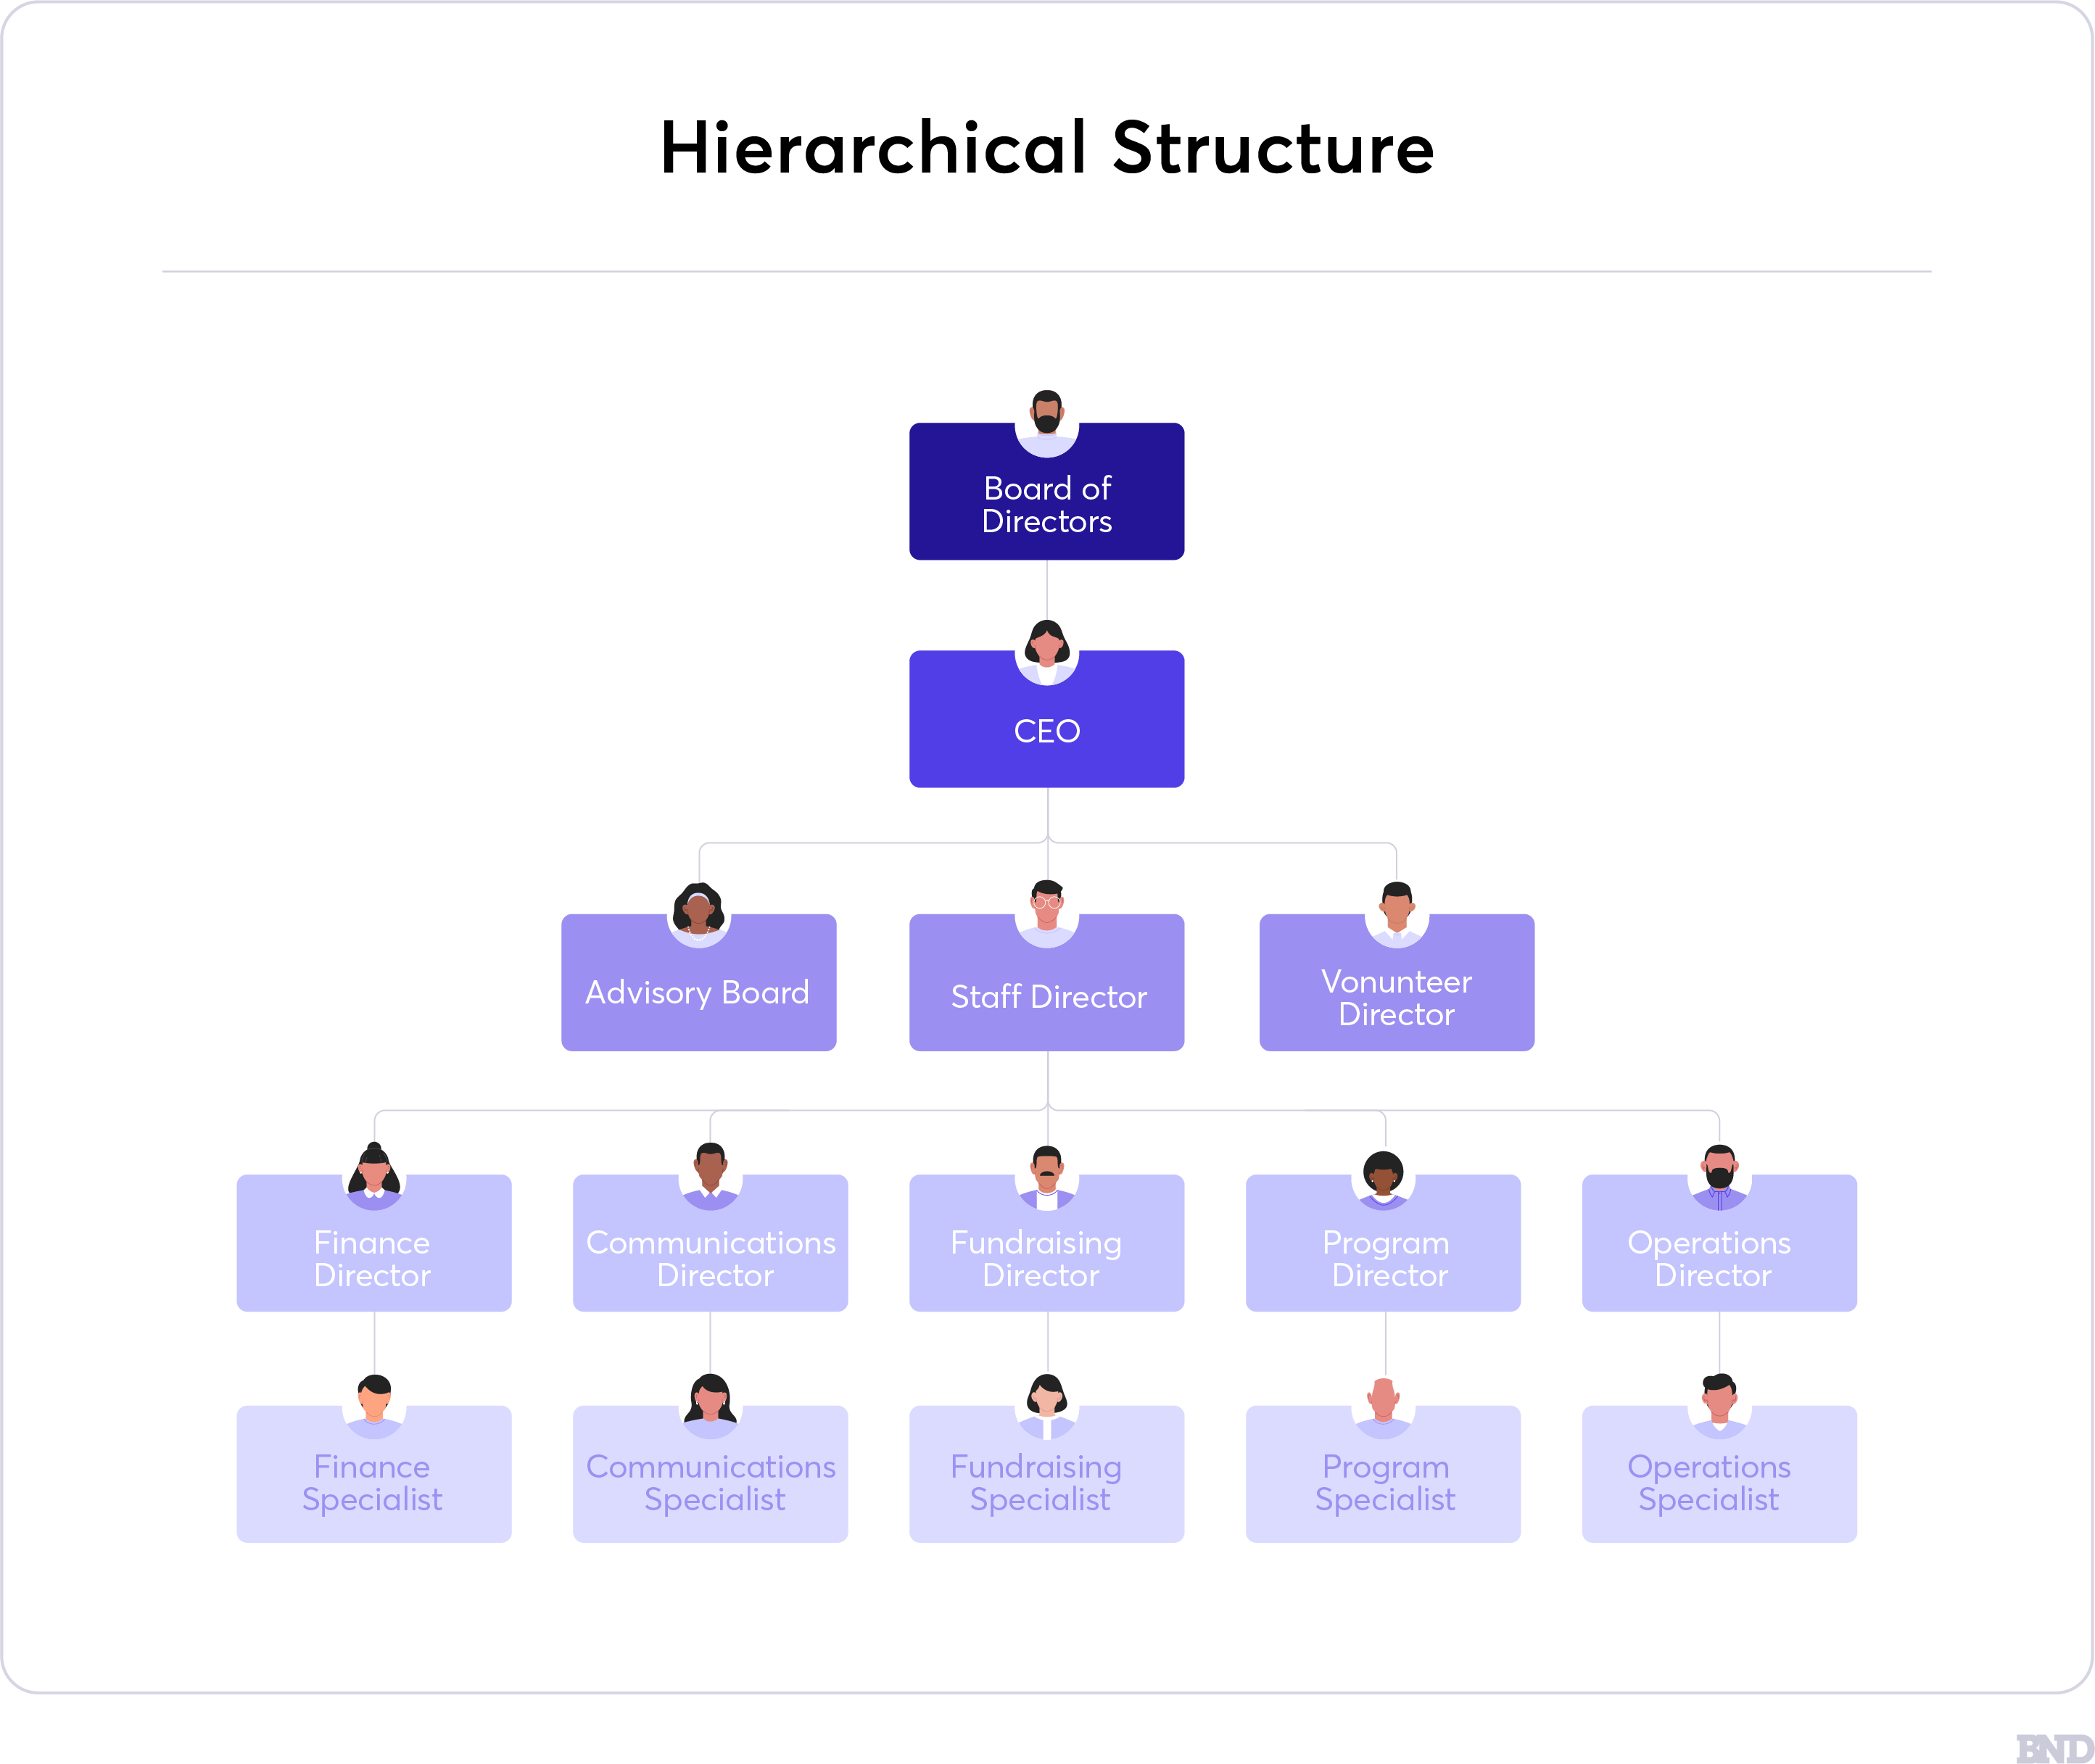 Hierarchical Structure graphic